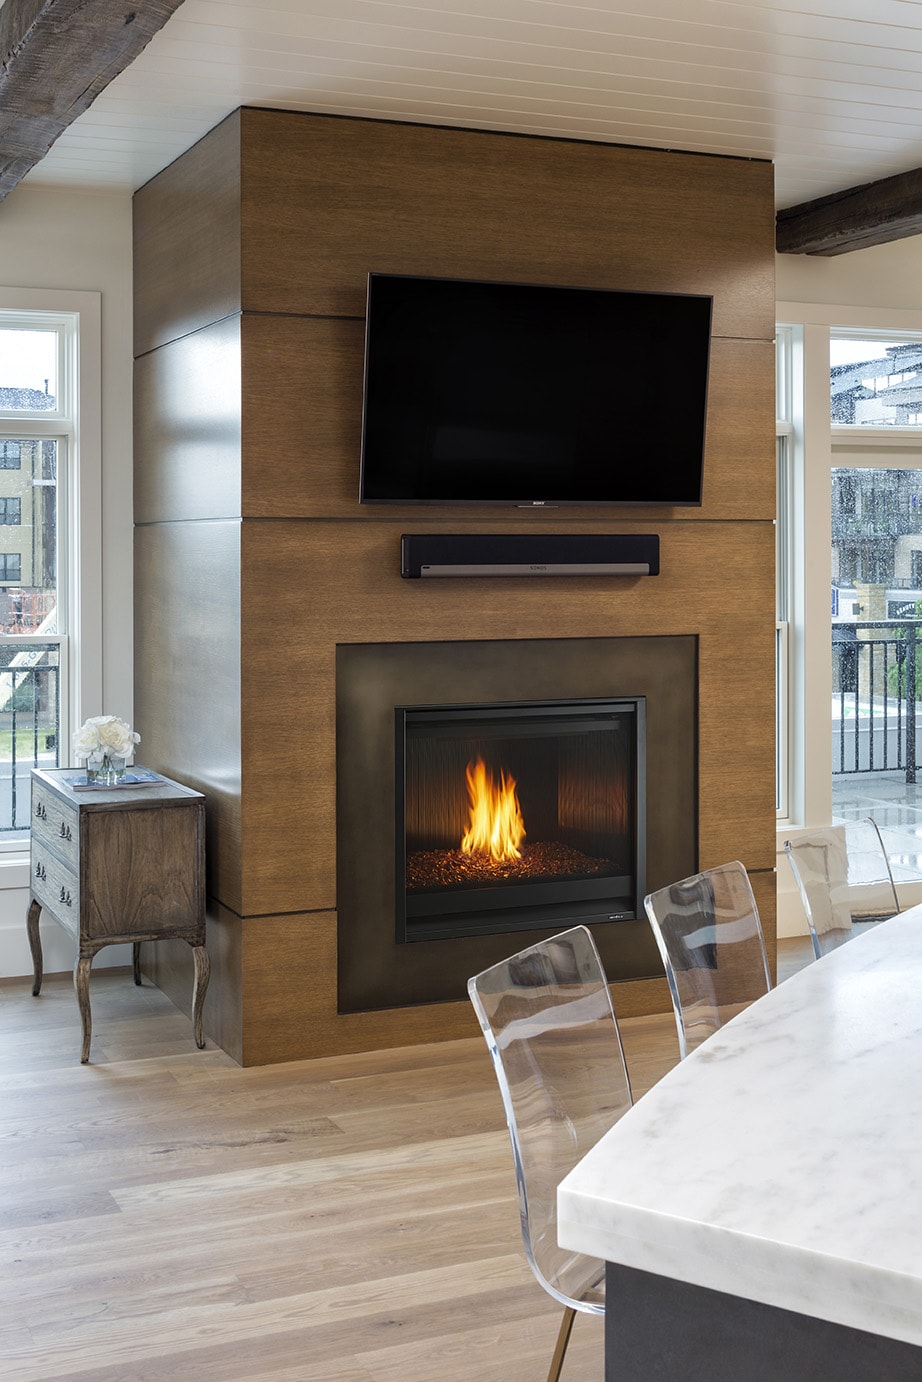 Double Sided Electric Fireplace Insert Best Of Unique Fireplace Idea Gallery